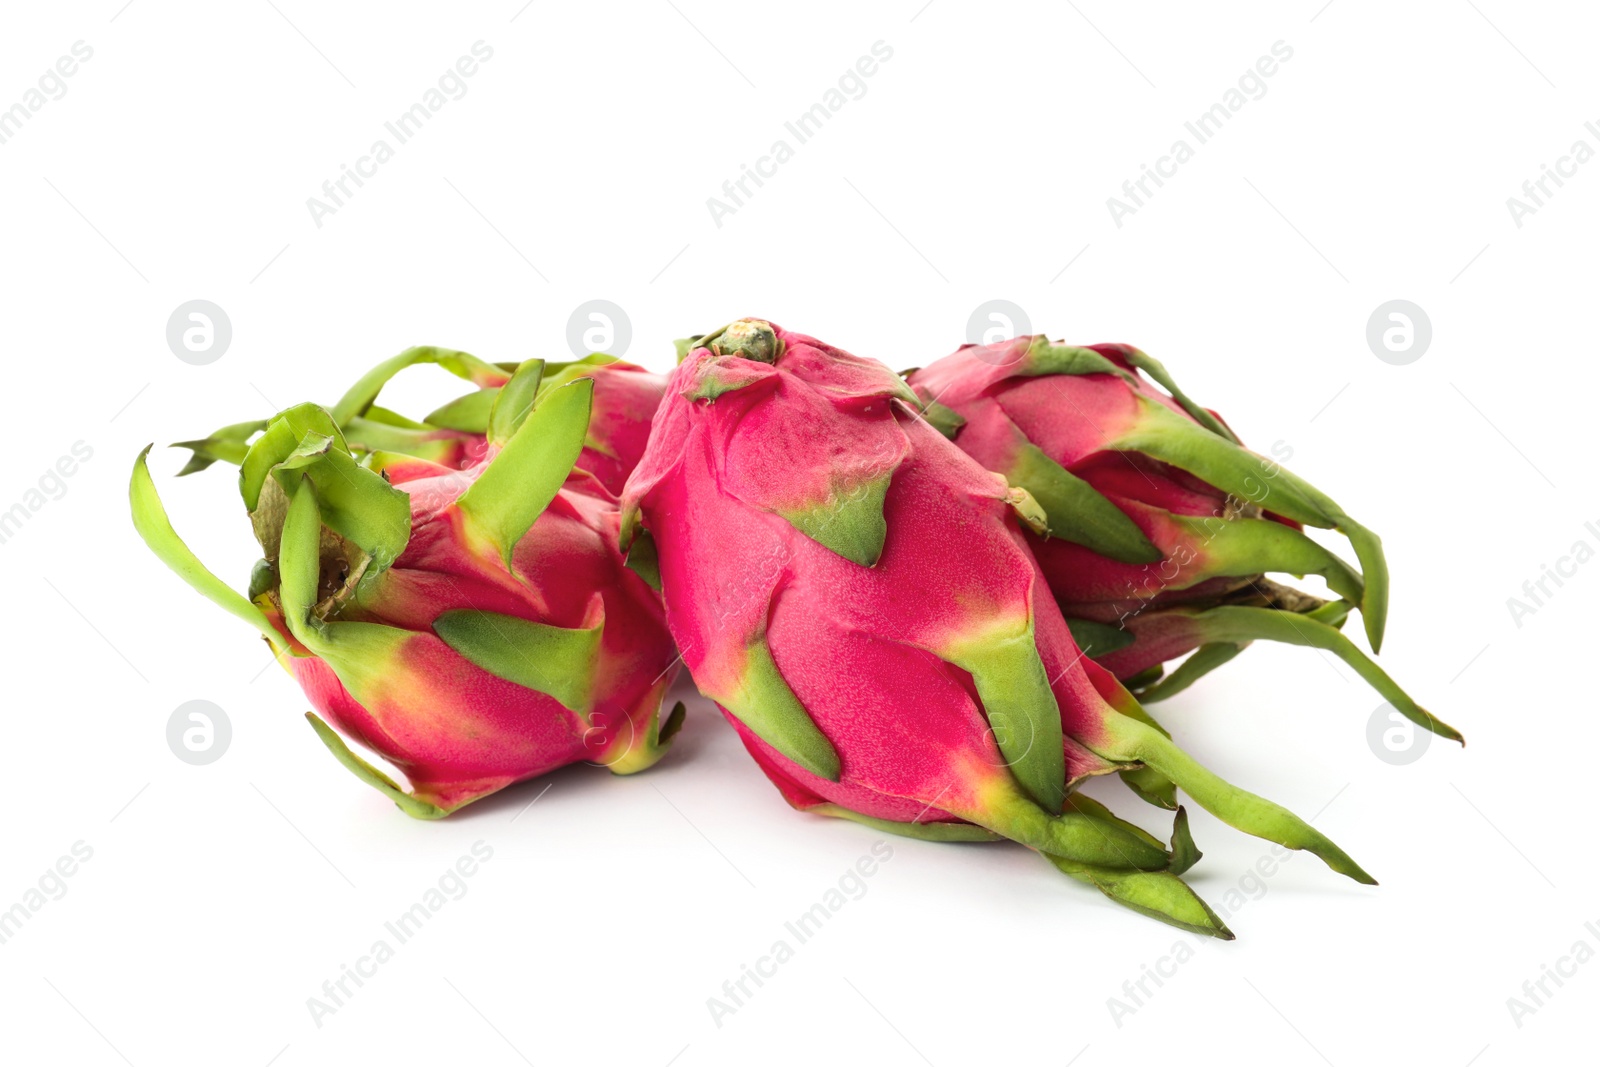 Photo of Delicious pink dragon fruits (pitahaya) on white background